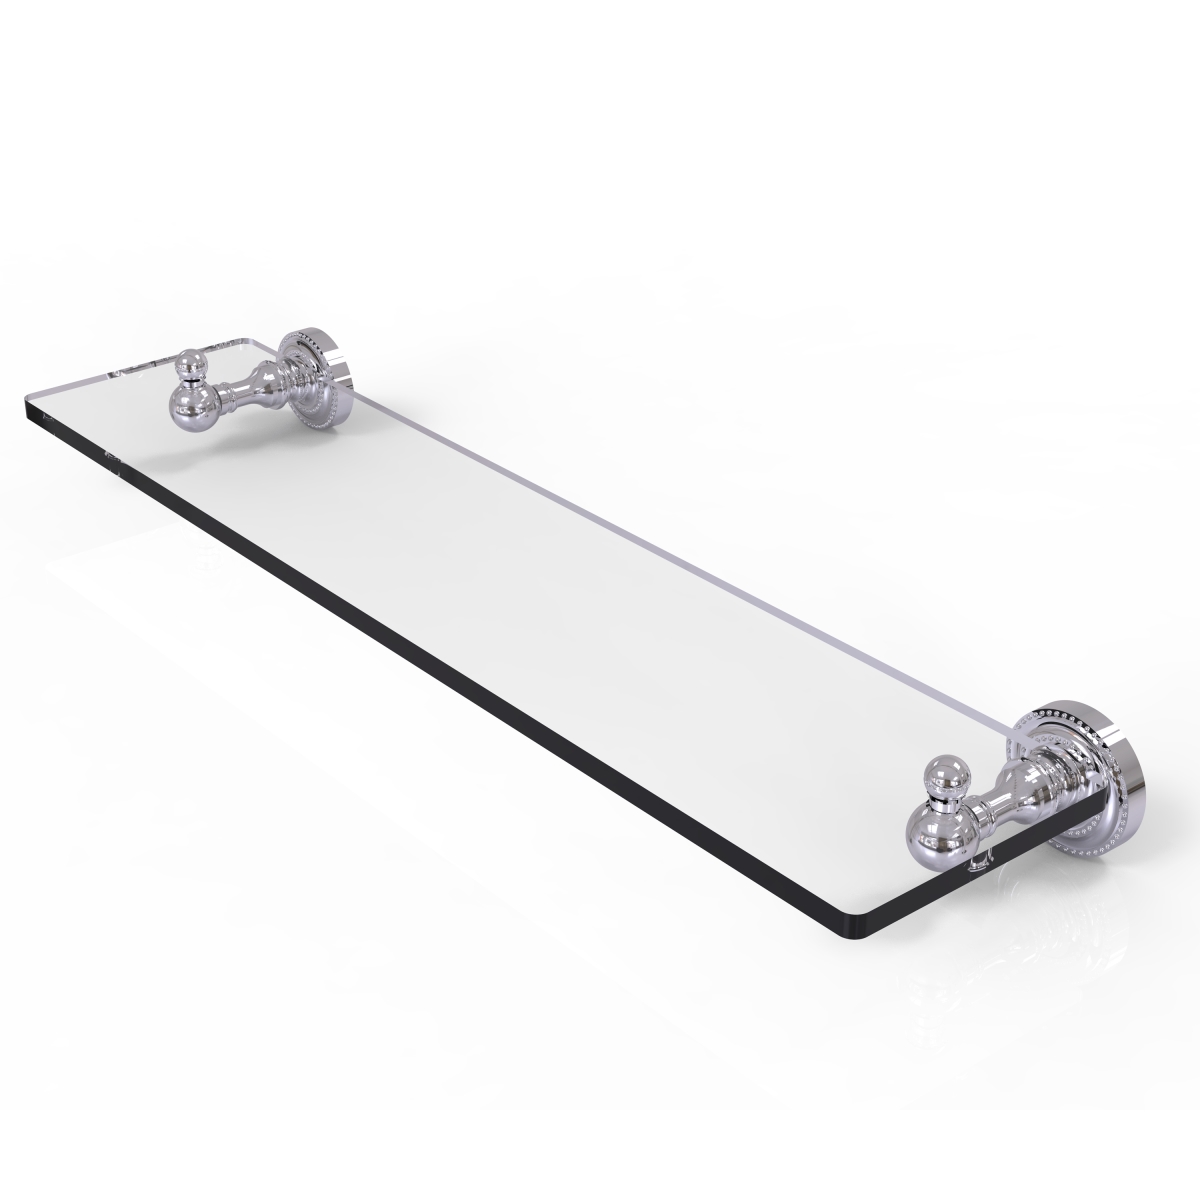 Picture of Allied Brass DT-1-22-PC 22 in. Dottingham Collection Glass Vanity Shelf with Beveled Edges, Polished Chrome